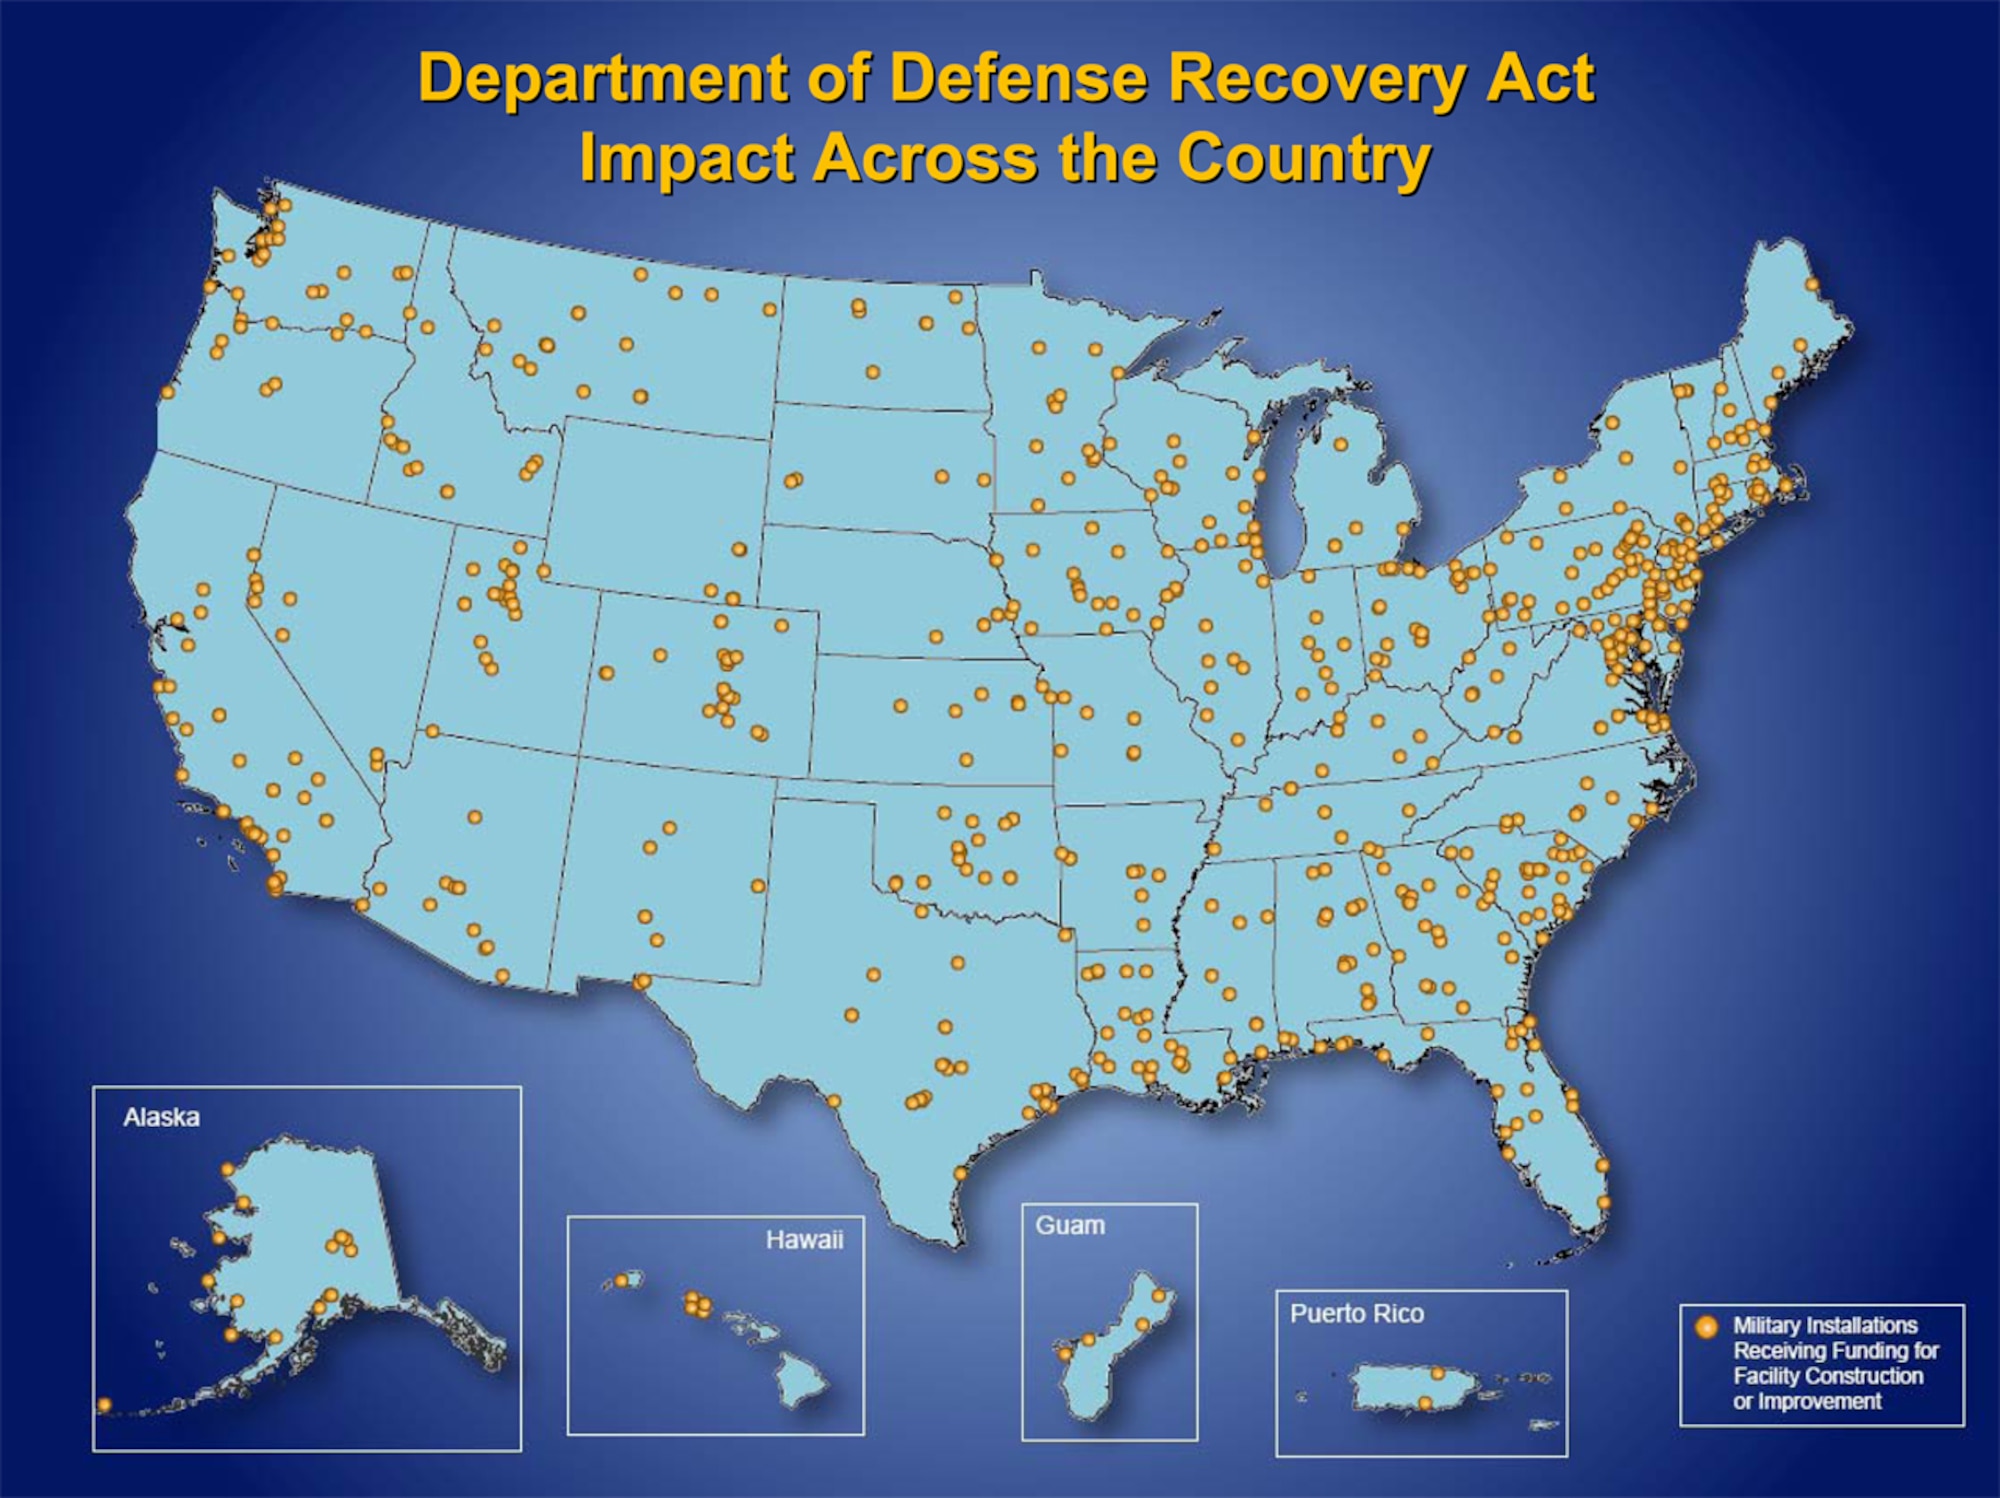 DOD Recovery Act impact across the country (DOD graphic)